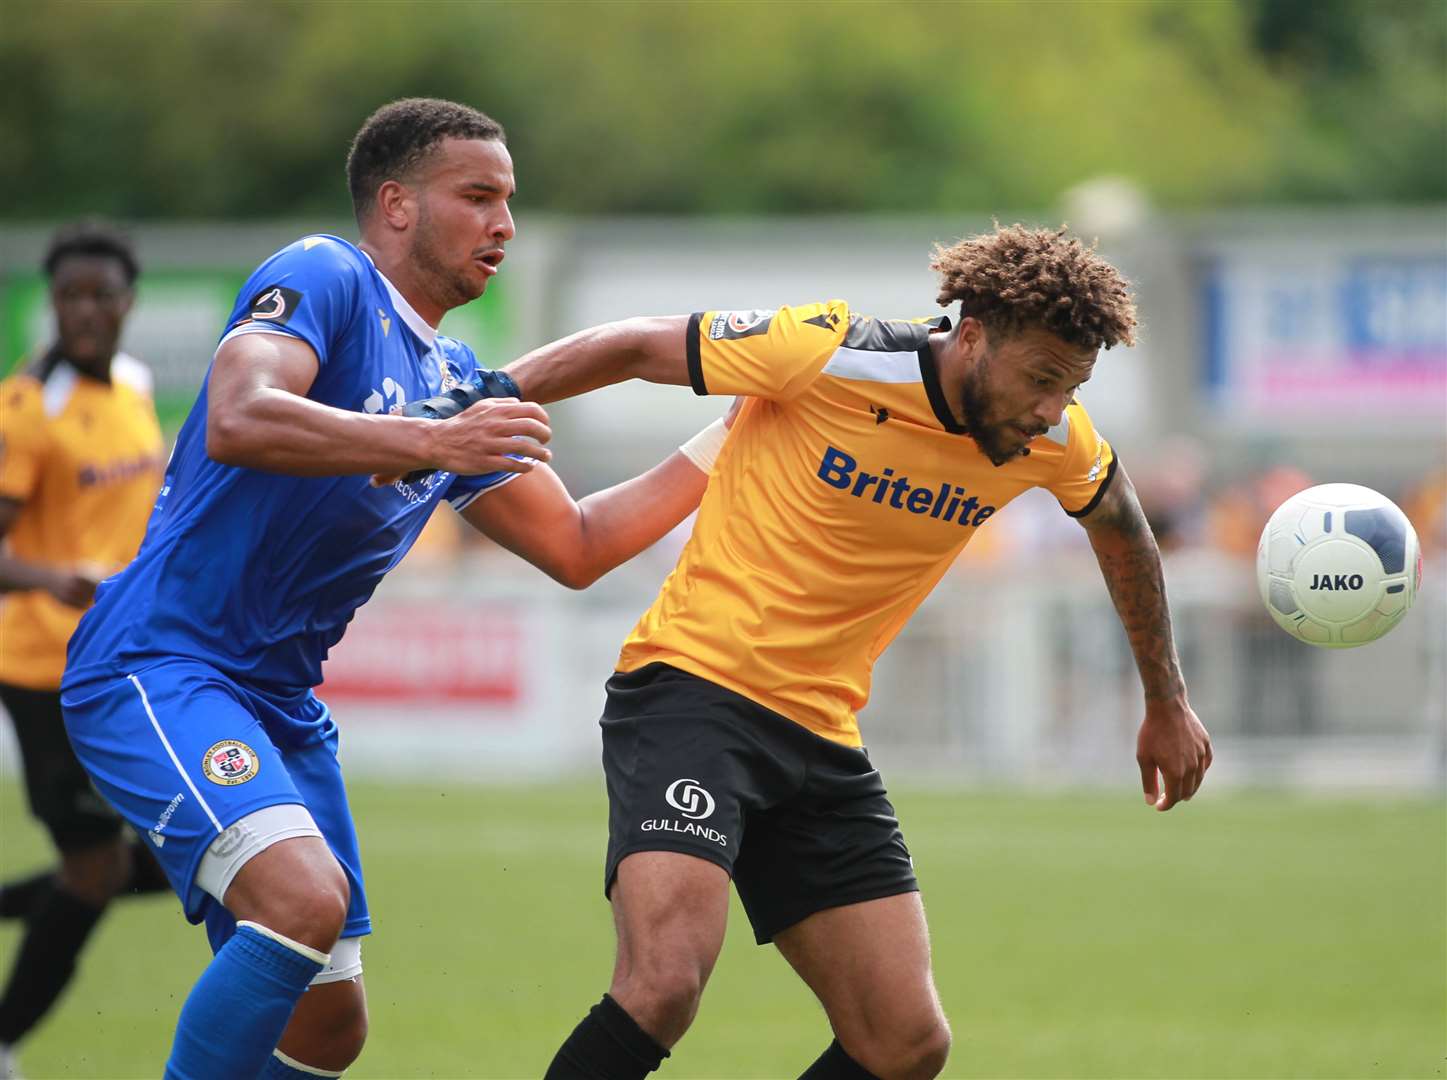 Summer signing Jonny Edwards battles for possession in the Bromley friendly Picture: John Westhrop